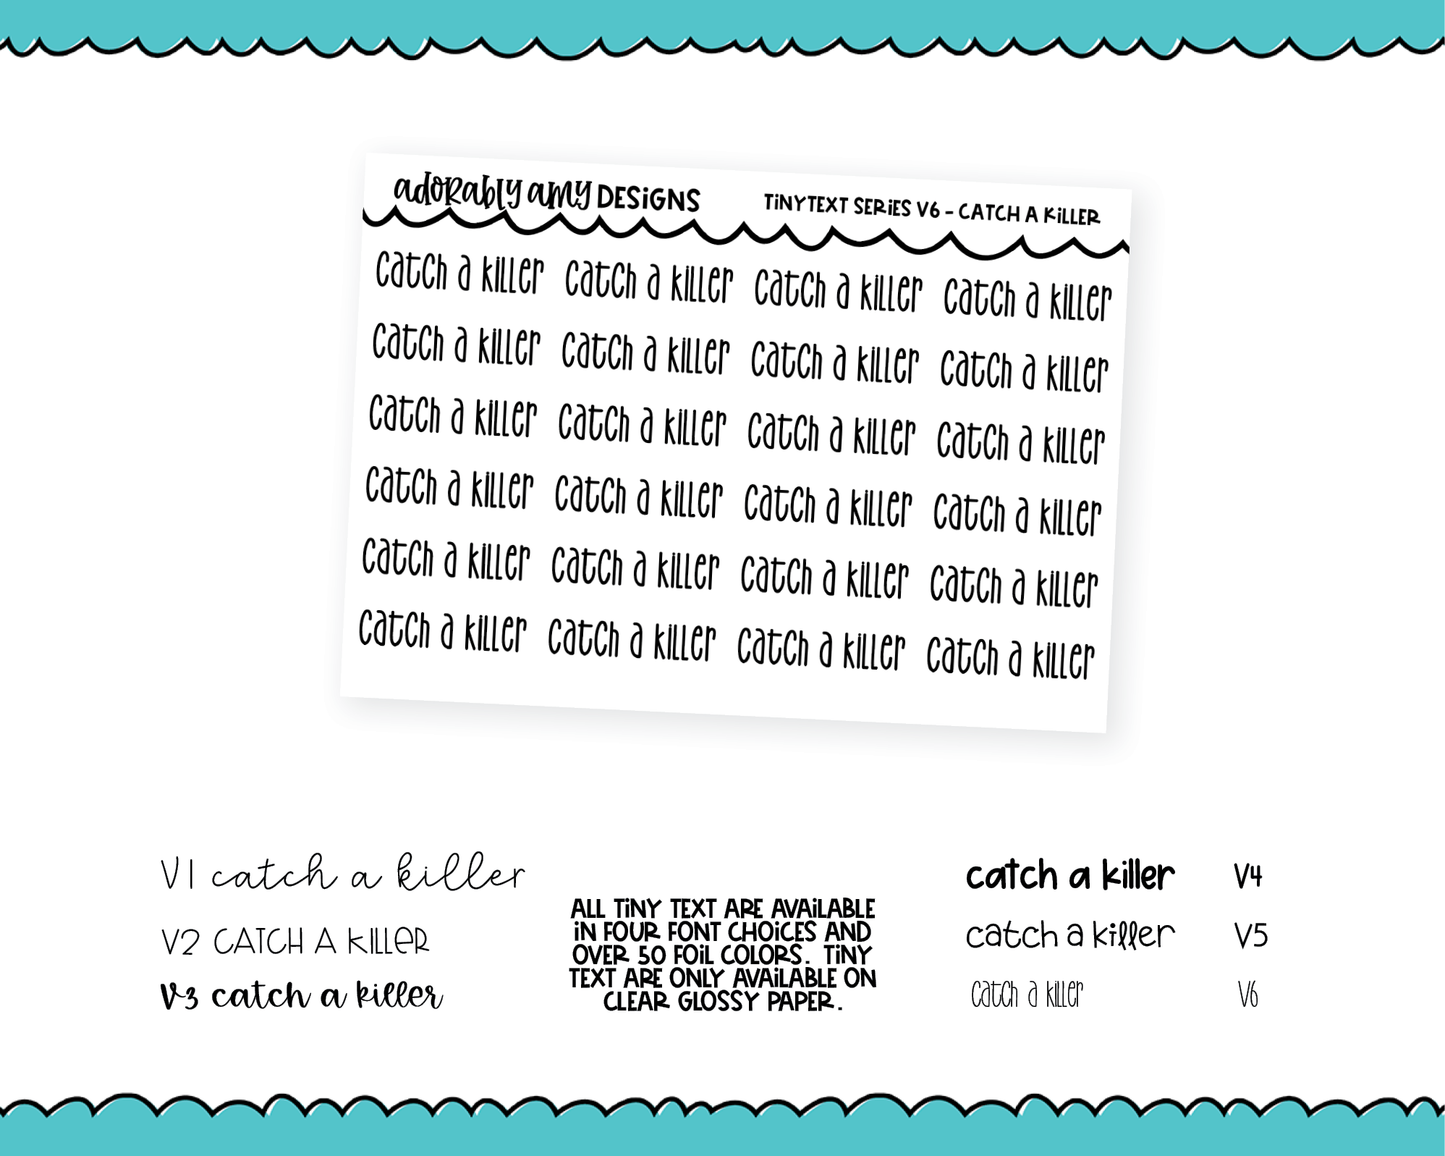 Foiled Tiny Text Series - Catch a Killer Checklist Size Planner Stickers for any Planner or Insert